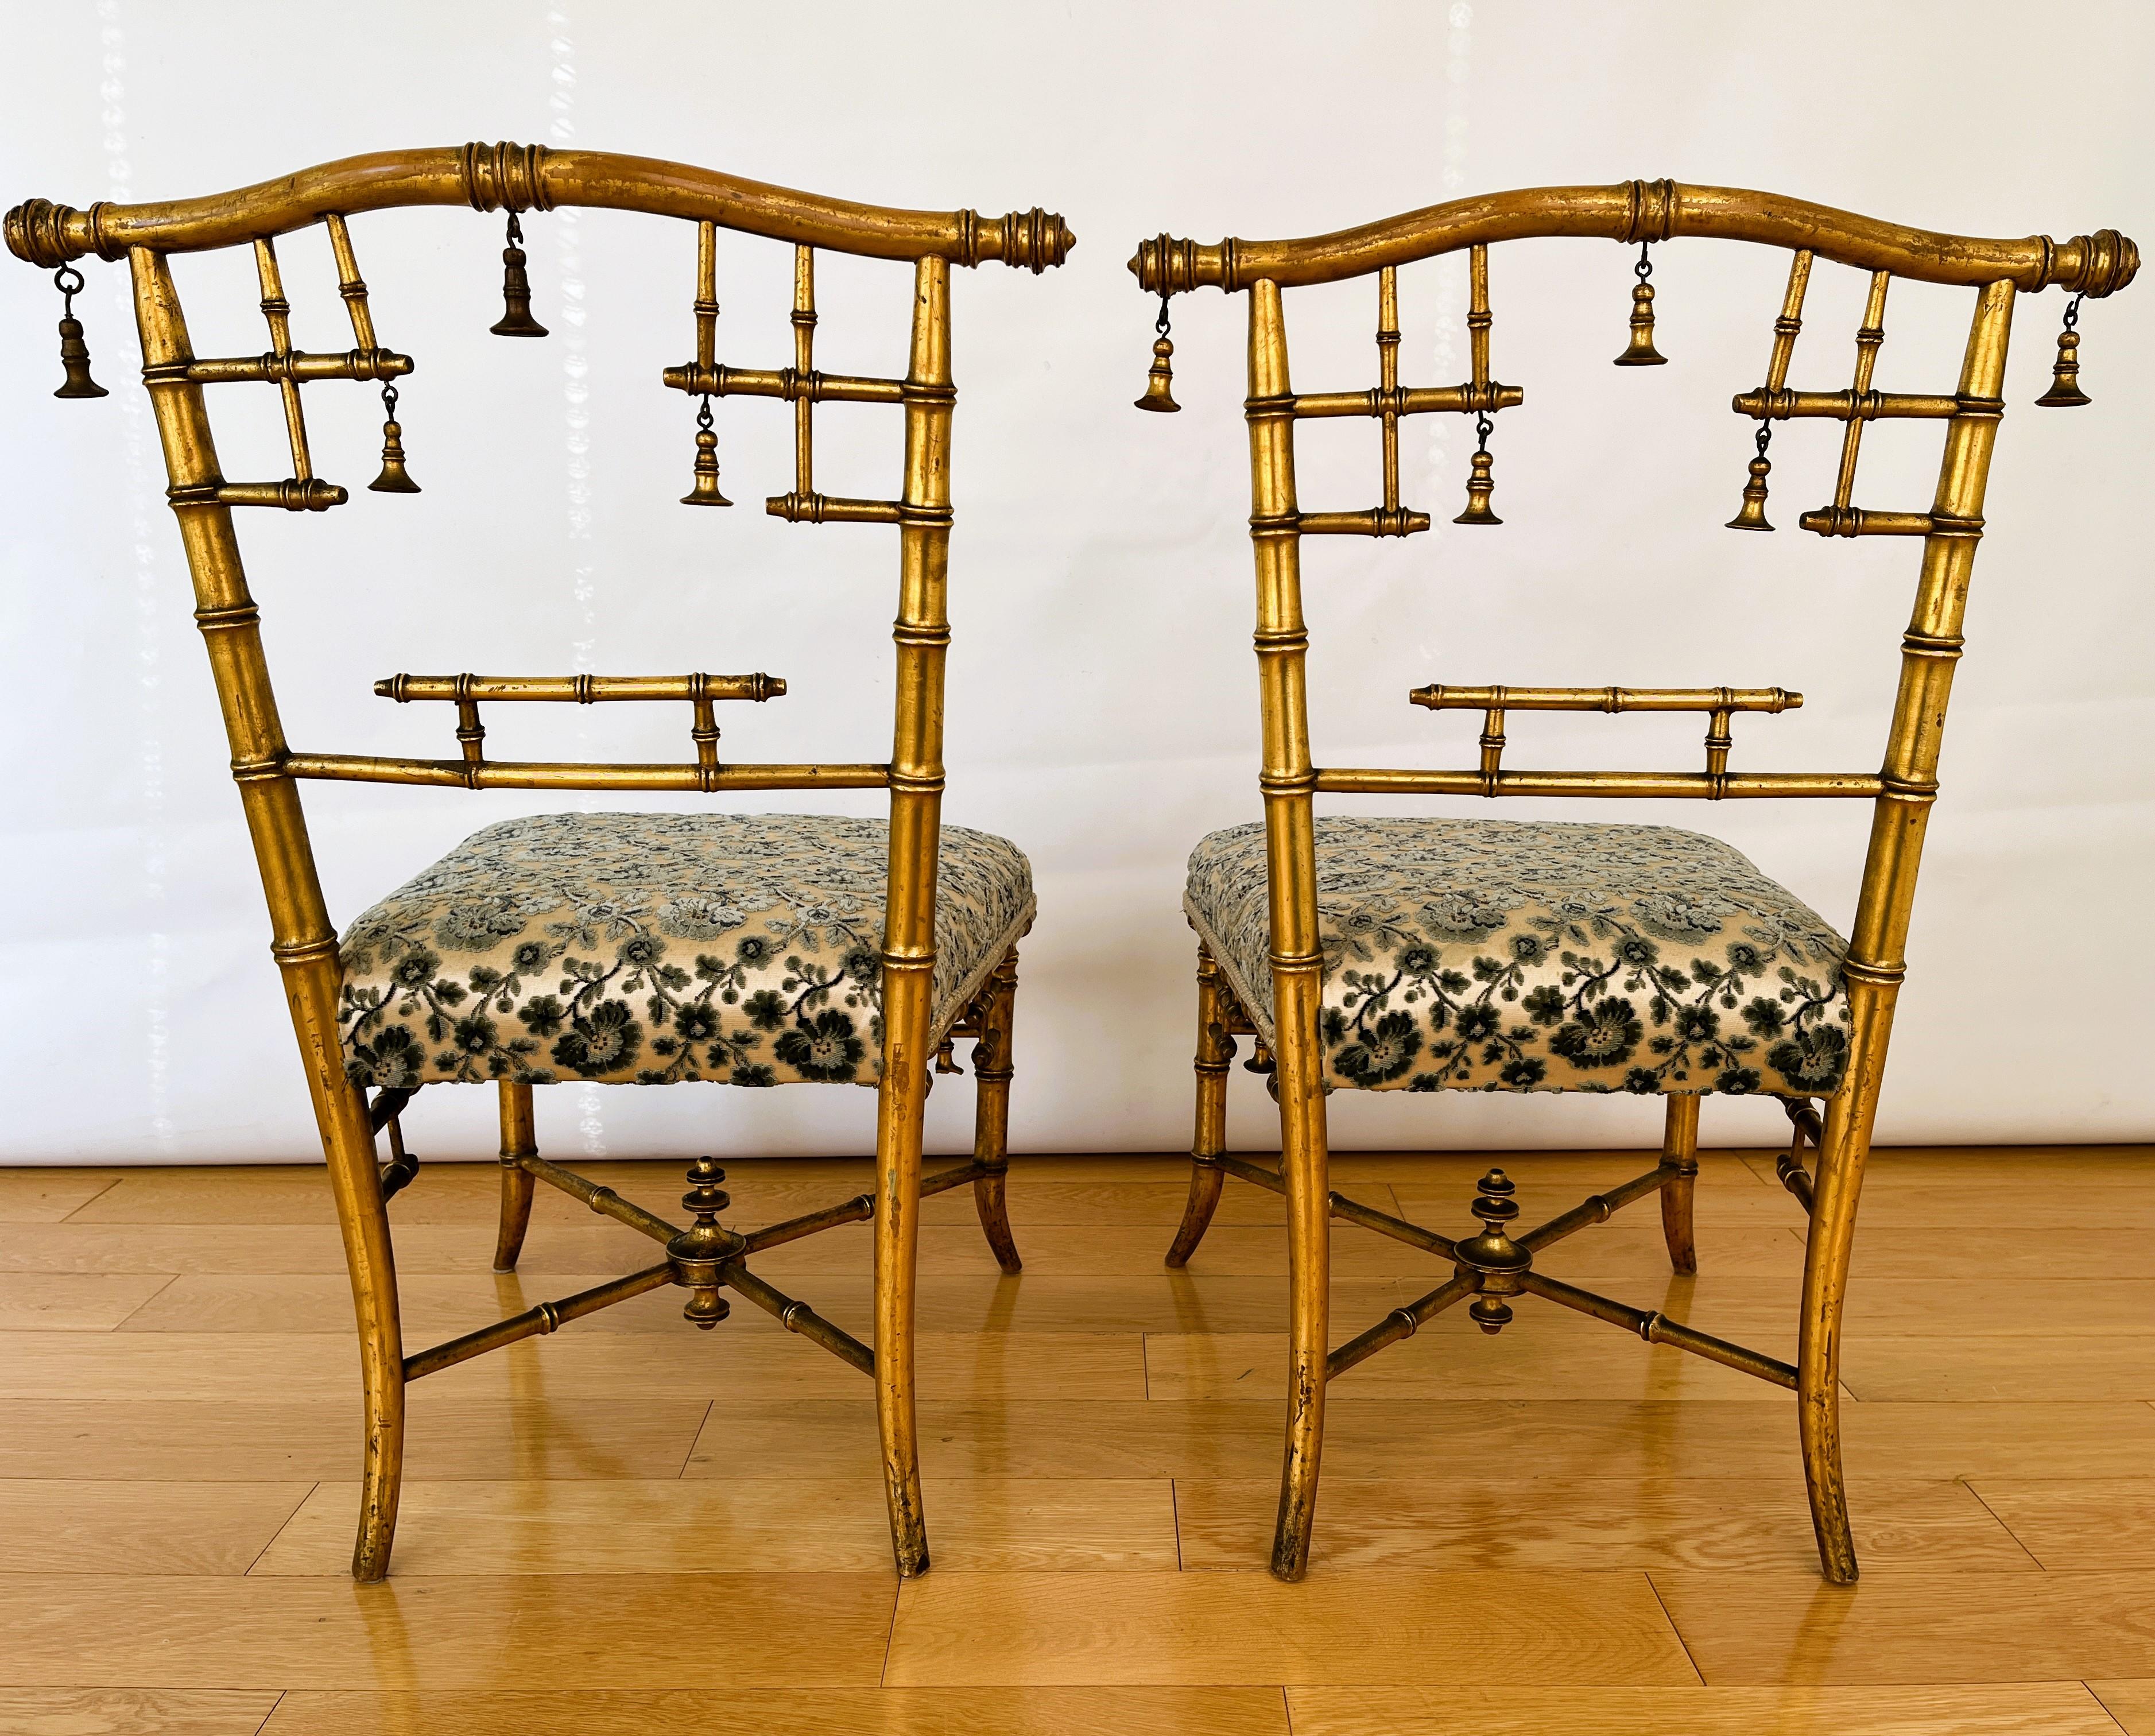 A rare vintage set of Gilt Wood Parlor Chairs with original upholstery in raised floral fabric.